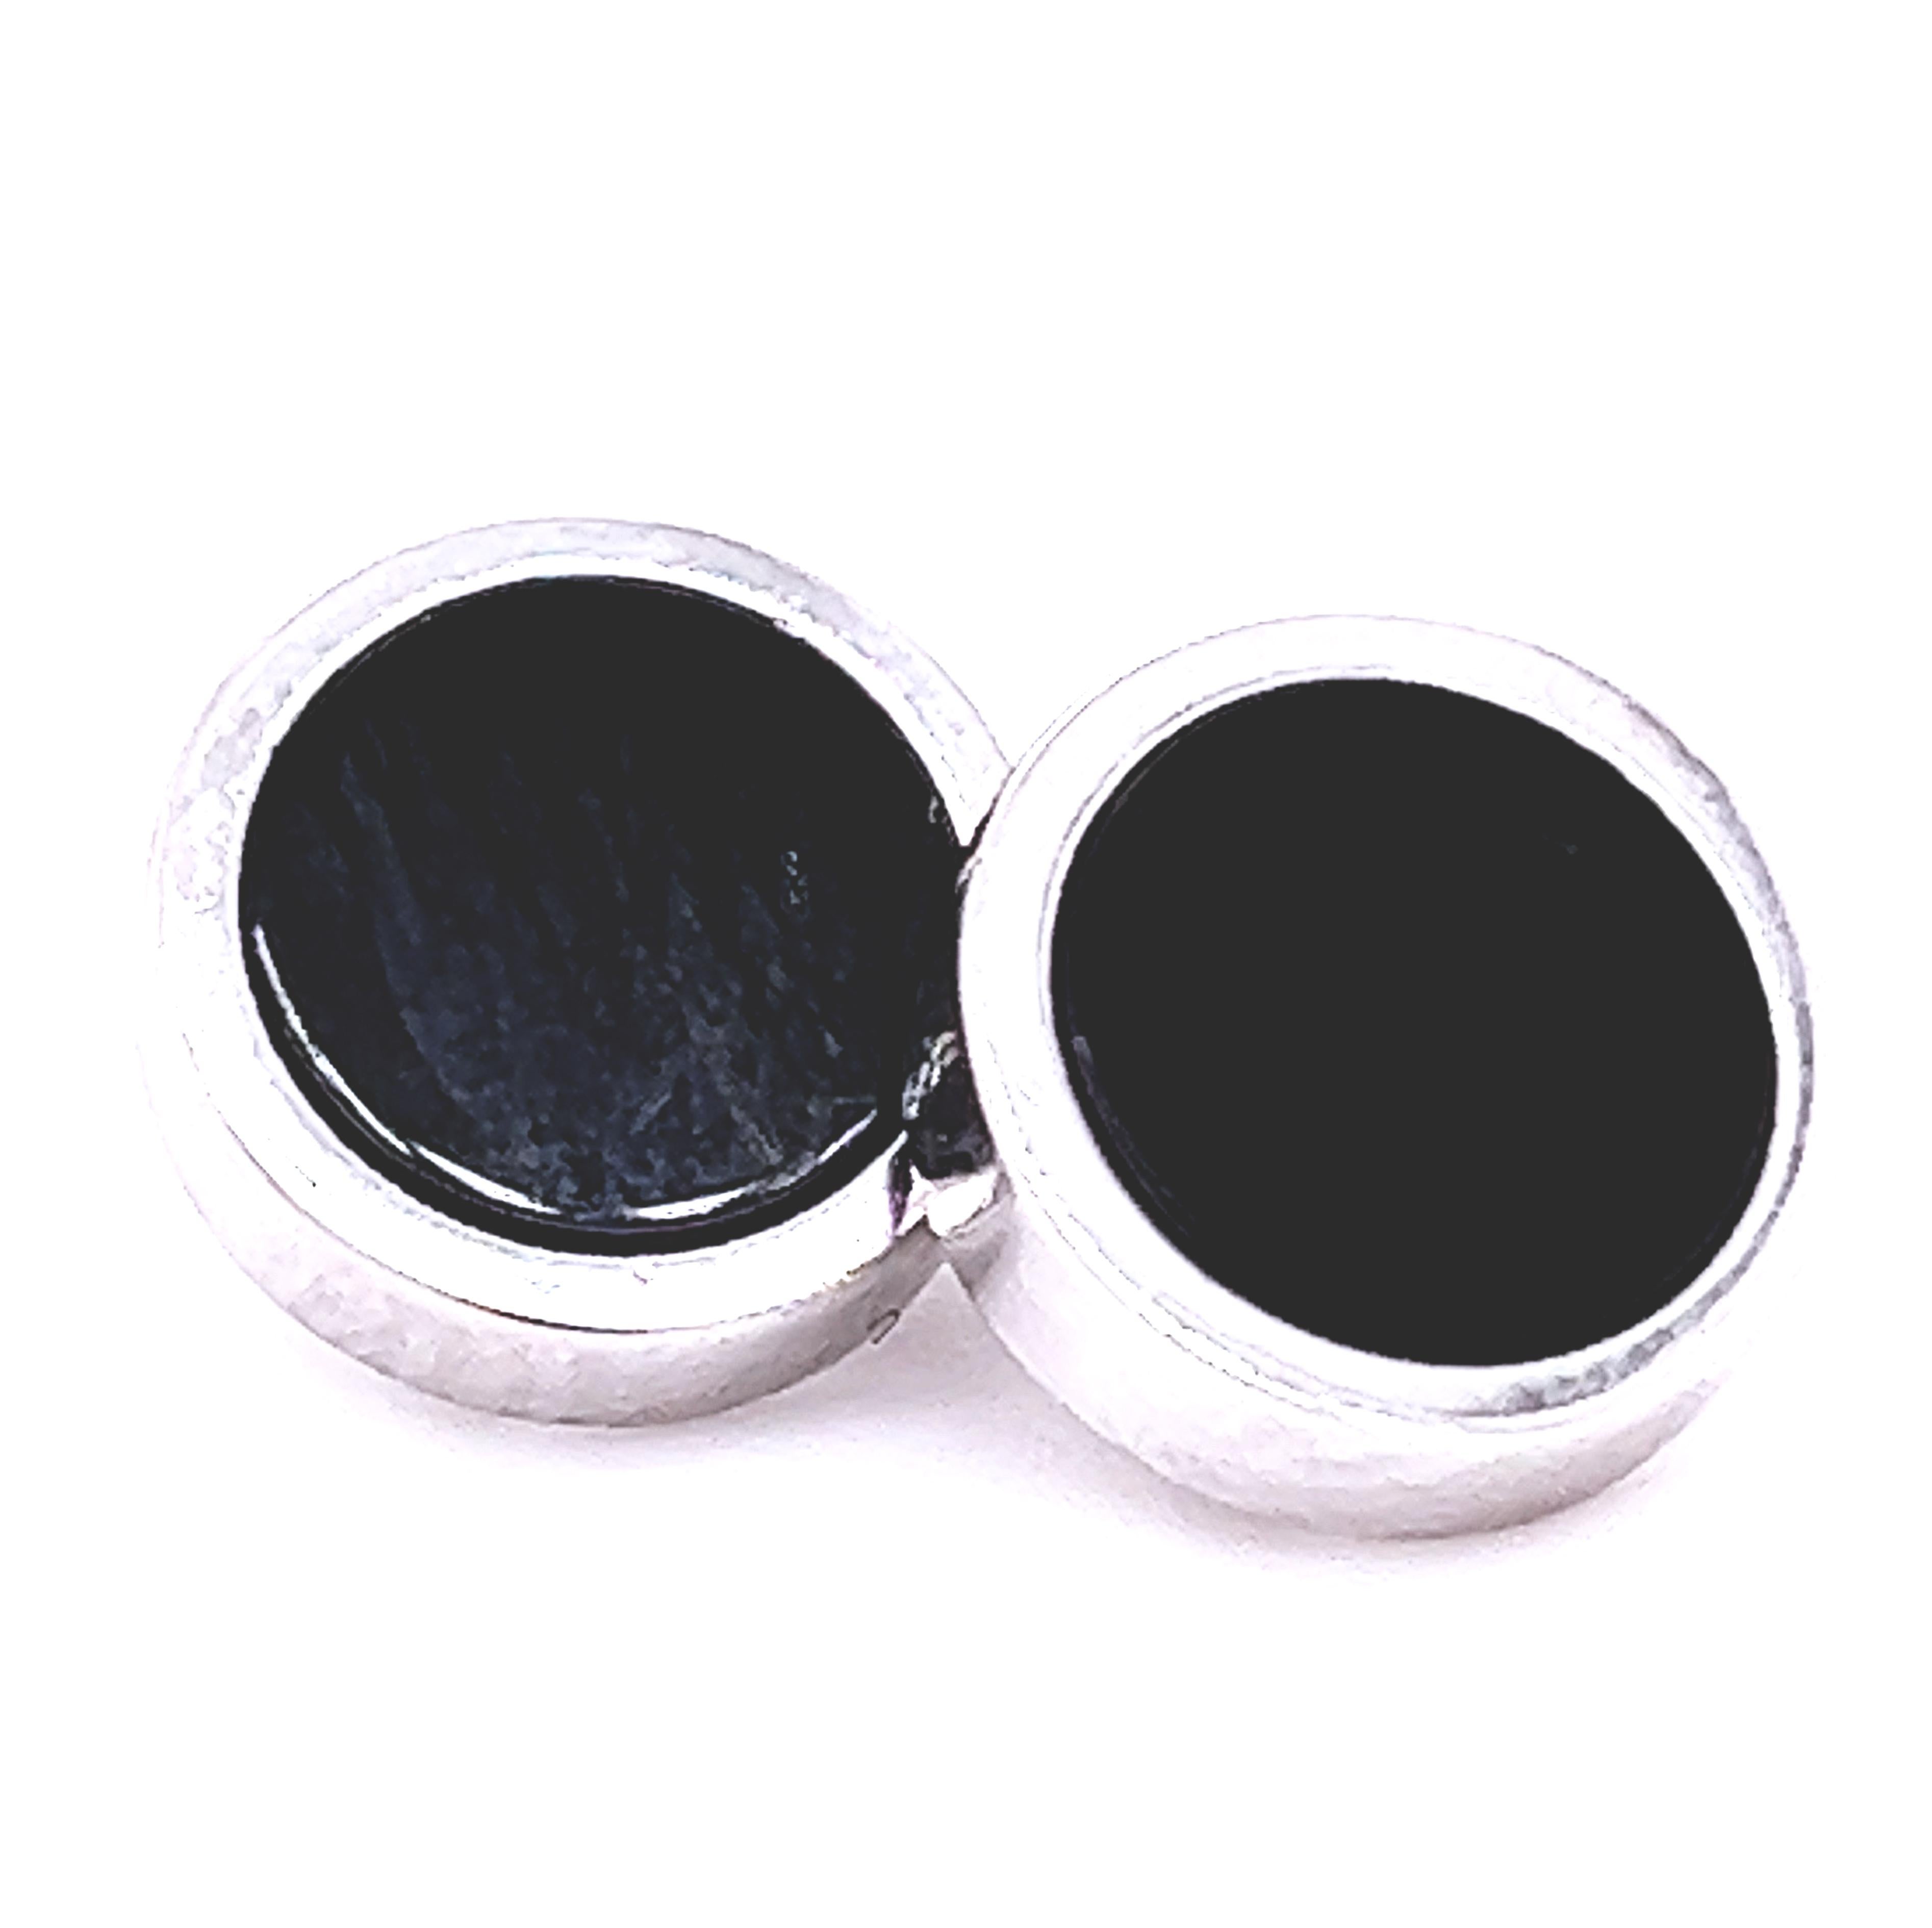 Chic and Timeless, Natural Hand Inlaid Black Onyx Disk Round Shaped Sterling Silver Cufflinks.
In our smart fitted Tobacco Suede Leather Case and Pouch.

